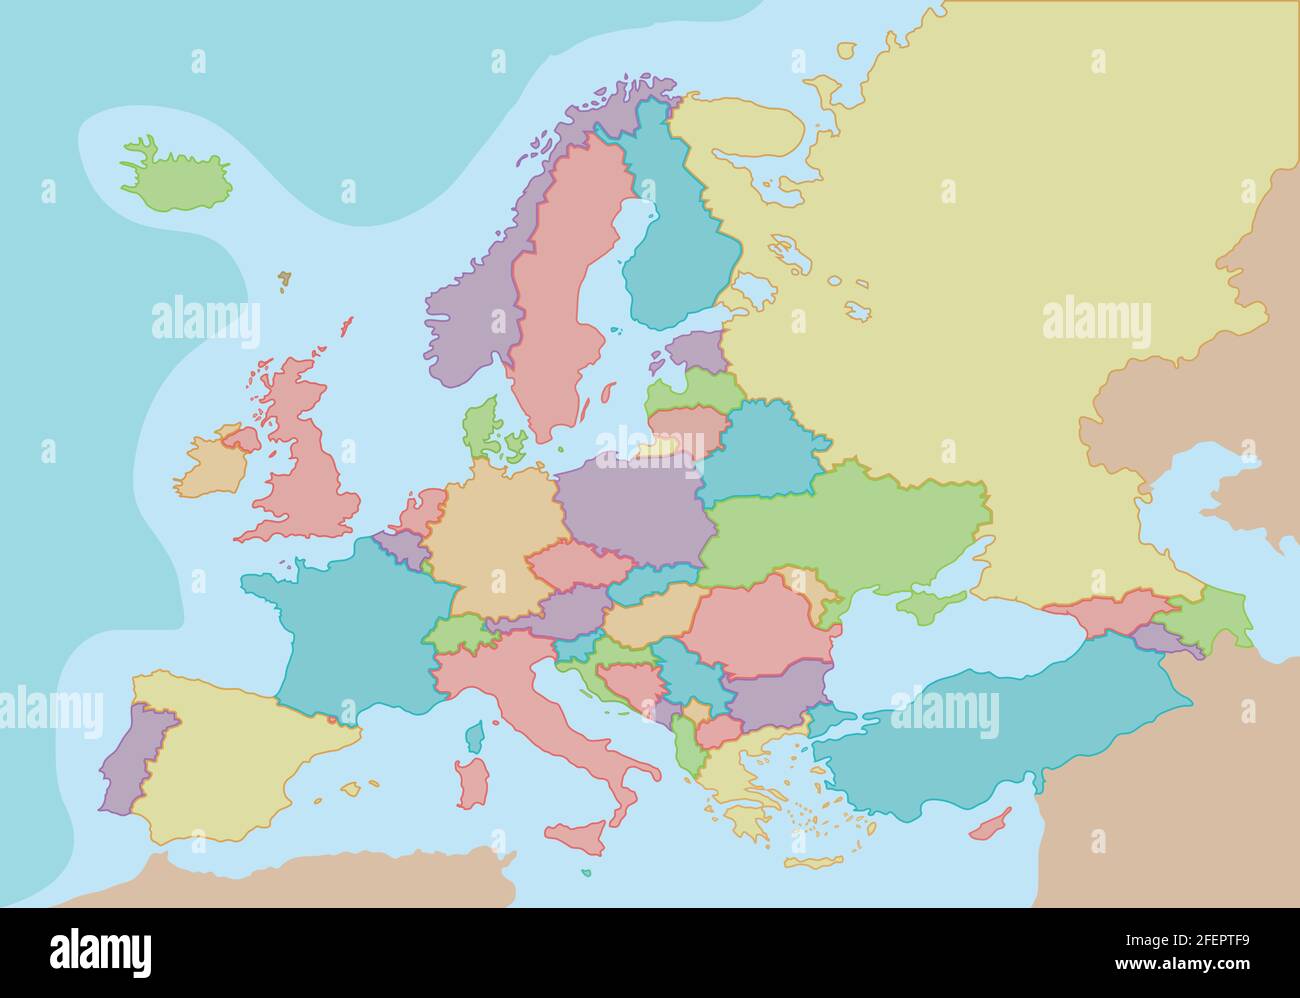 Political map of Europe with colors and borders for each country. Vector illustration. Stock Vector